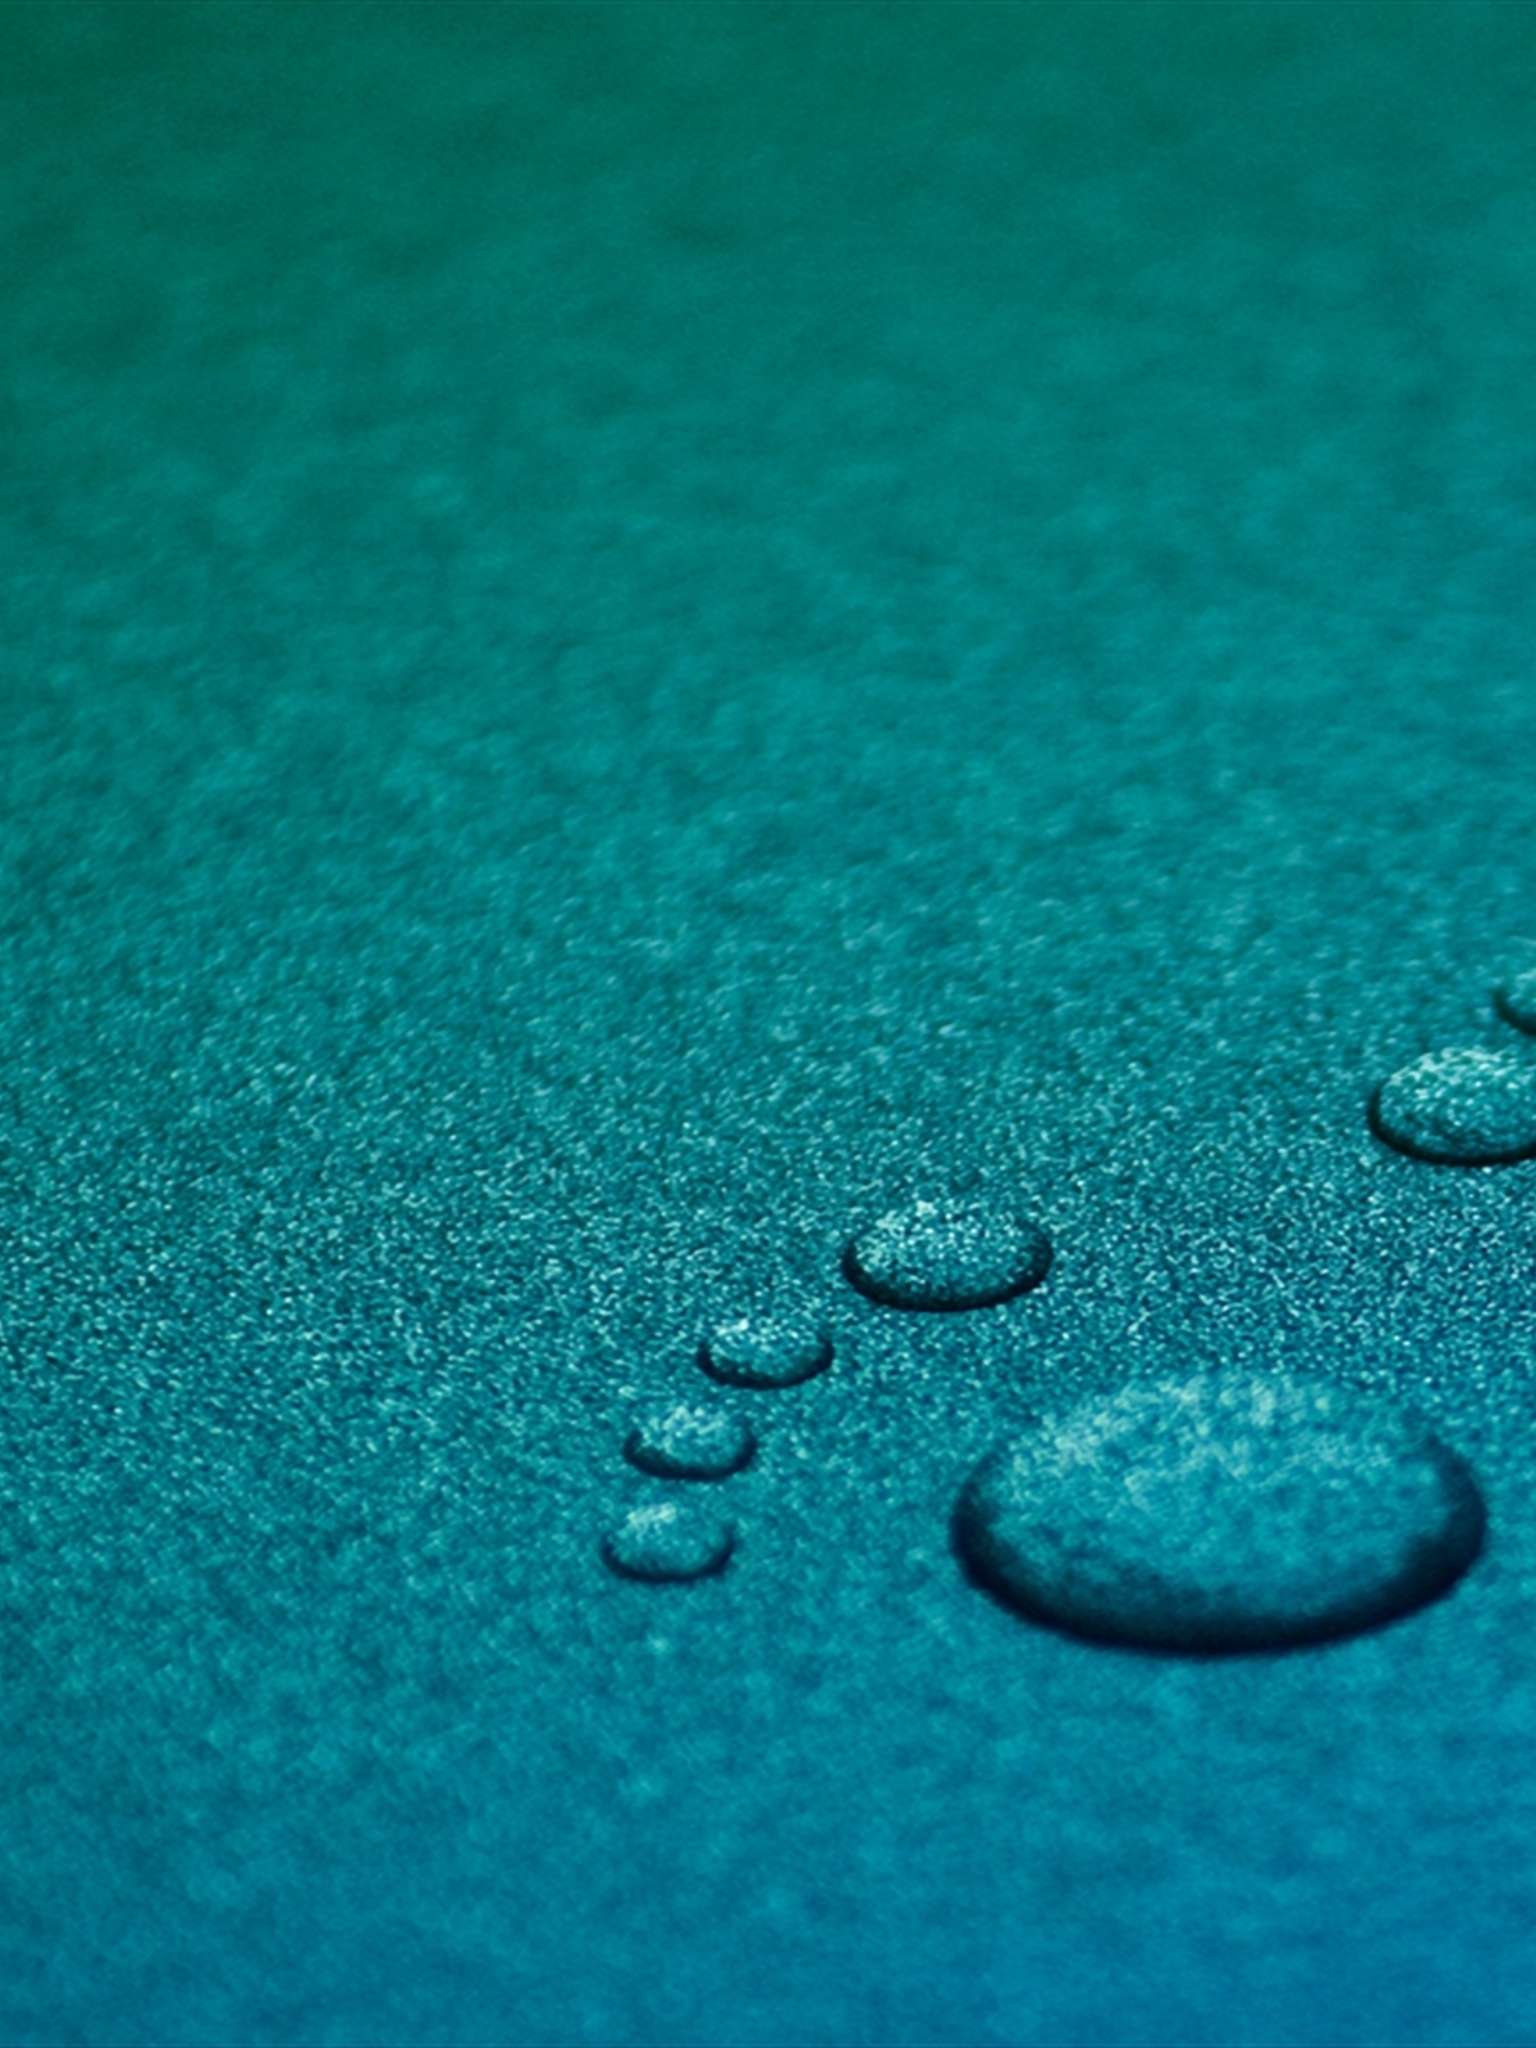 Image: Traces, water, drops, surface